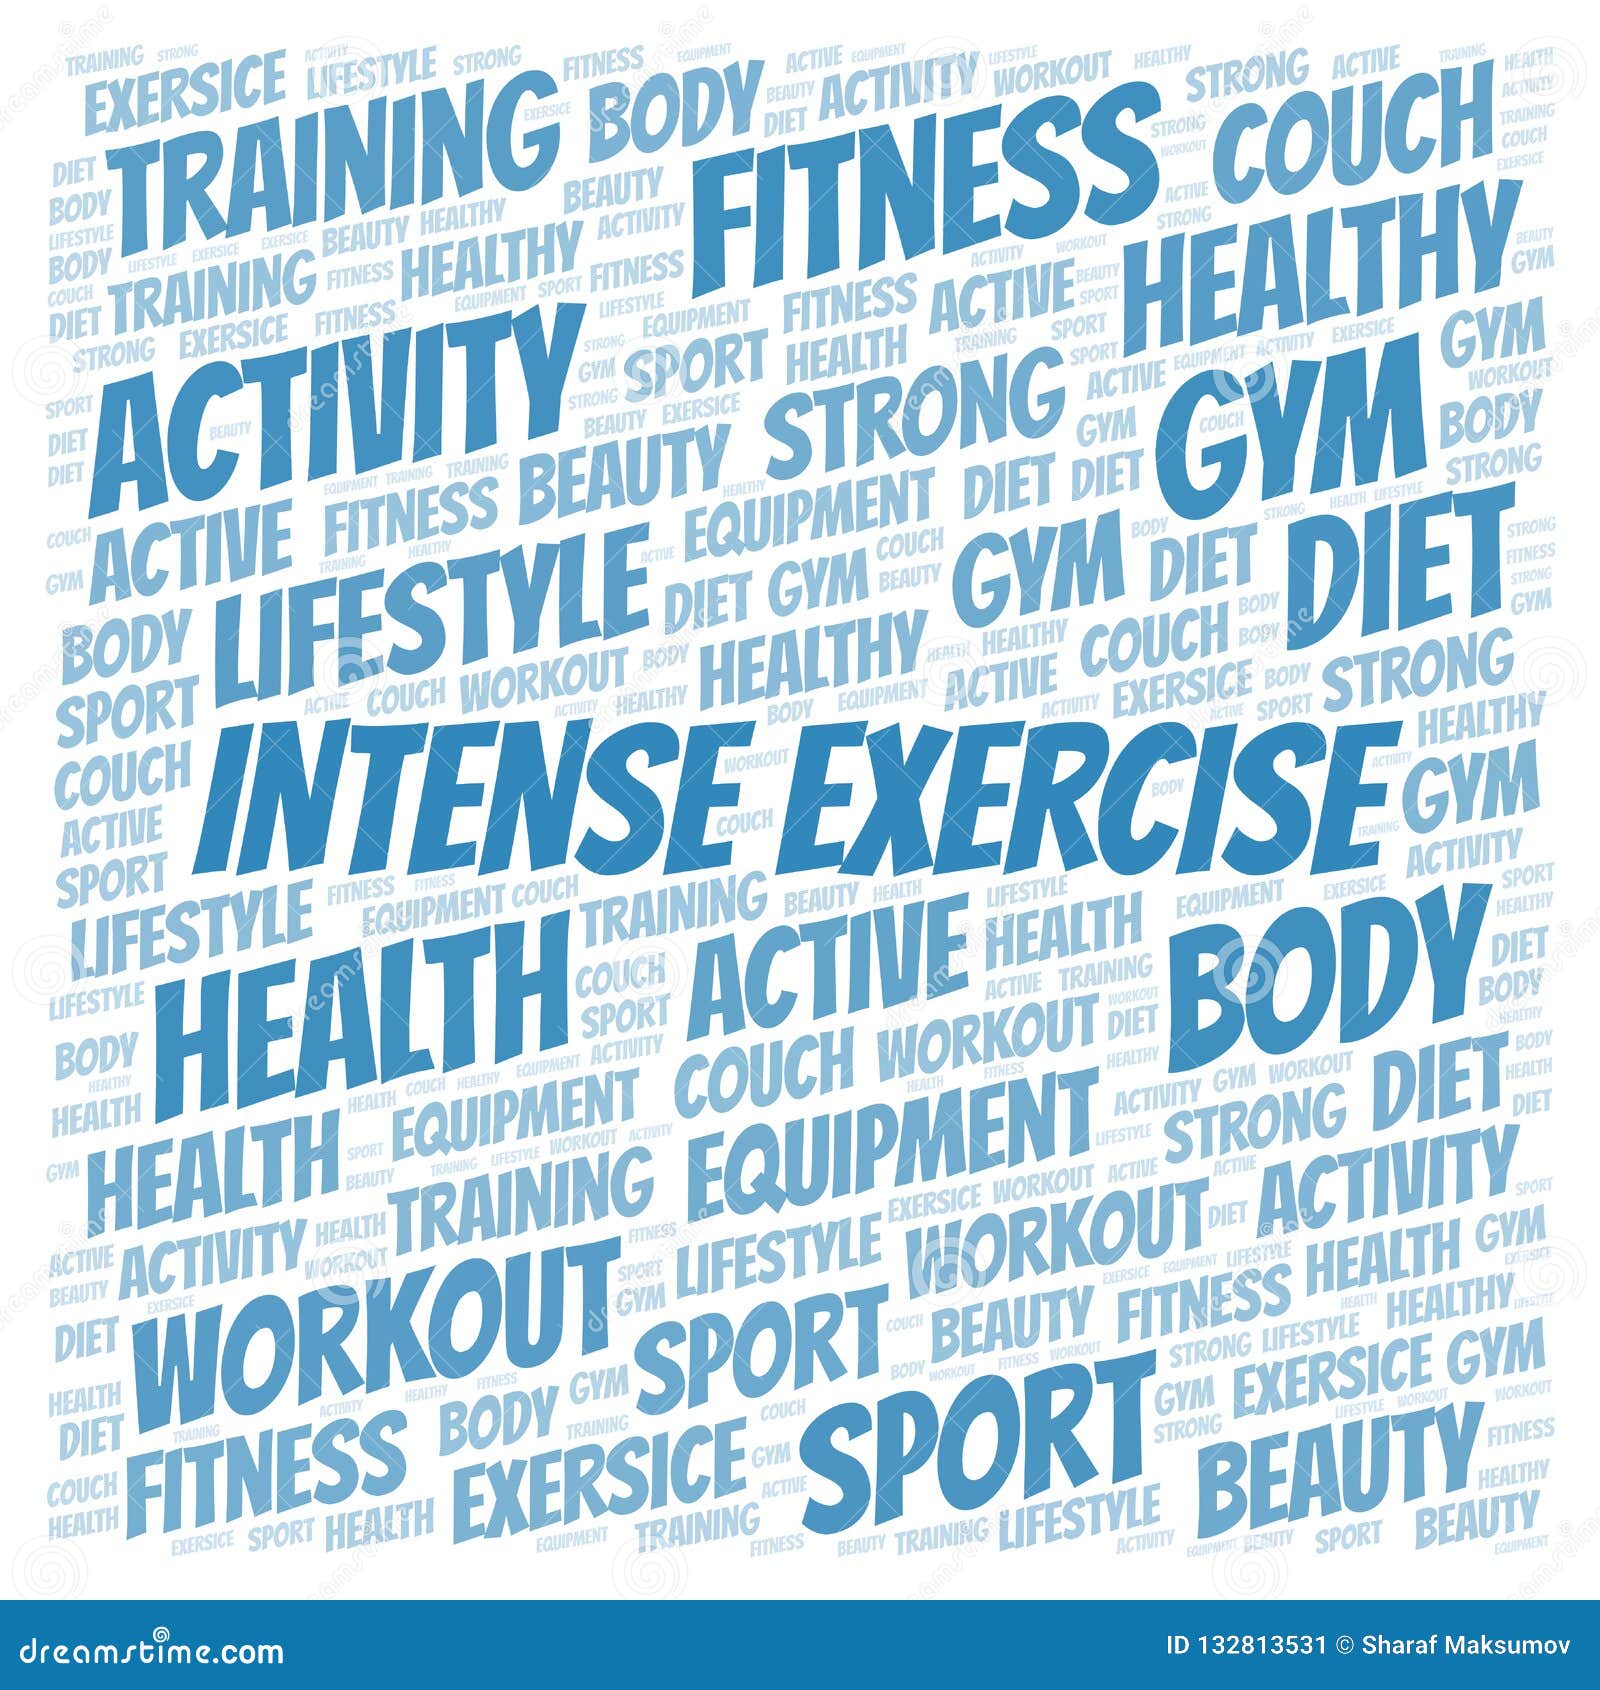 Intense Exercise Word Cloud Stock Illustration - Illustration of poster ...